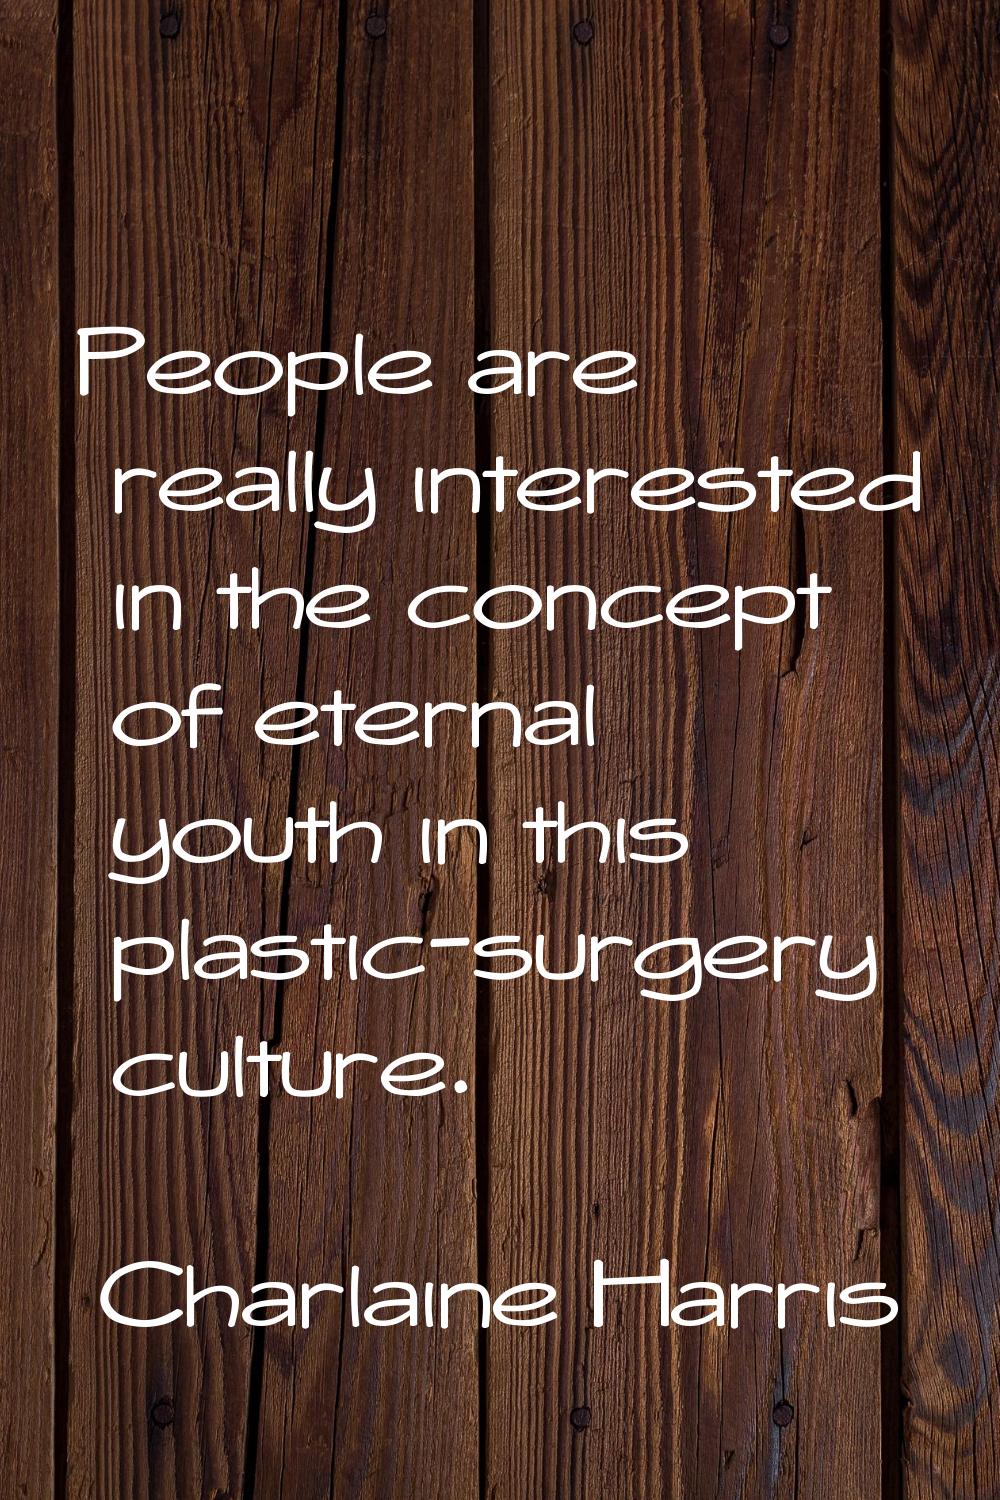 People are really interested in the concept of eternal youth in this plastic-surgery culture.